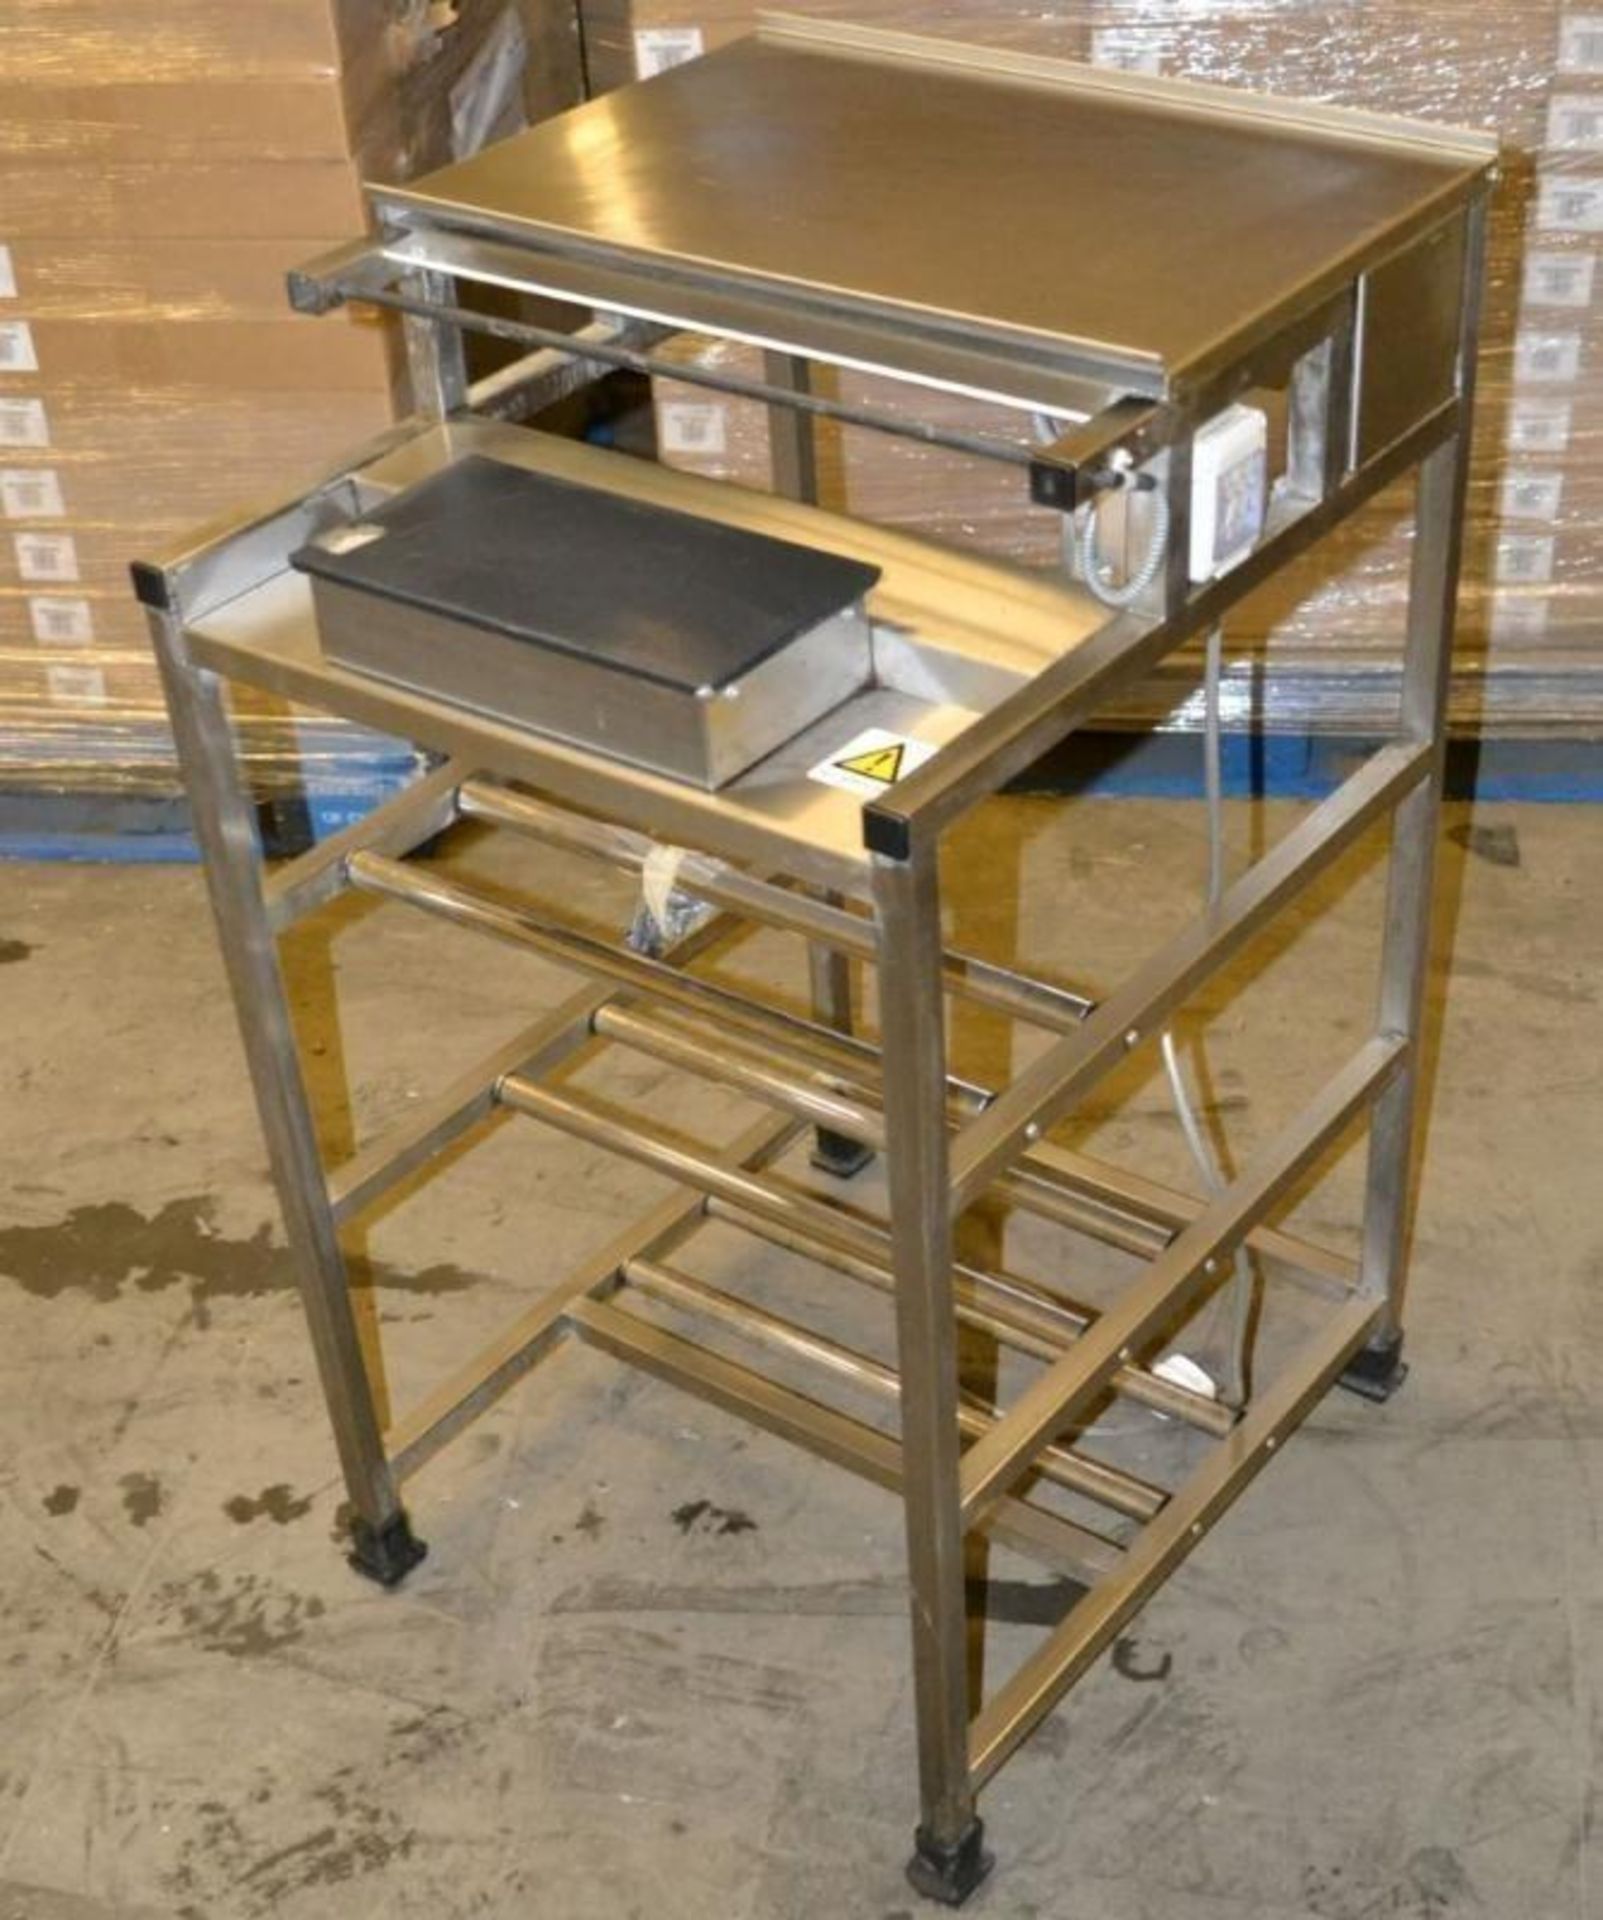 1 x Metalcraft Tray Stretch Wrapping Machine - Dimensions: 56 x 61.5 x 94.5cm - Ref: MC139 - CL282 - - Image 5 of 10